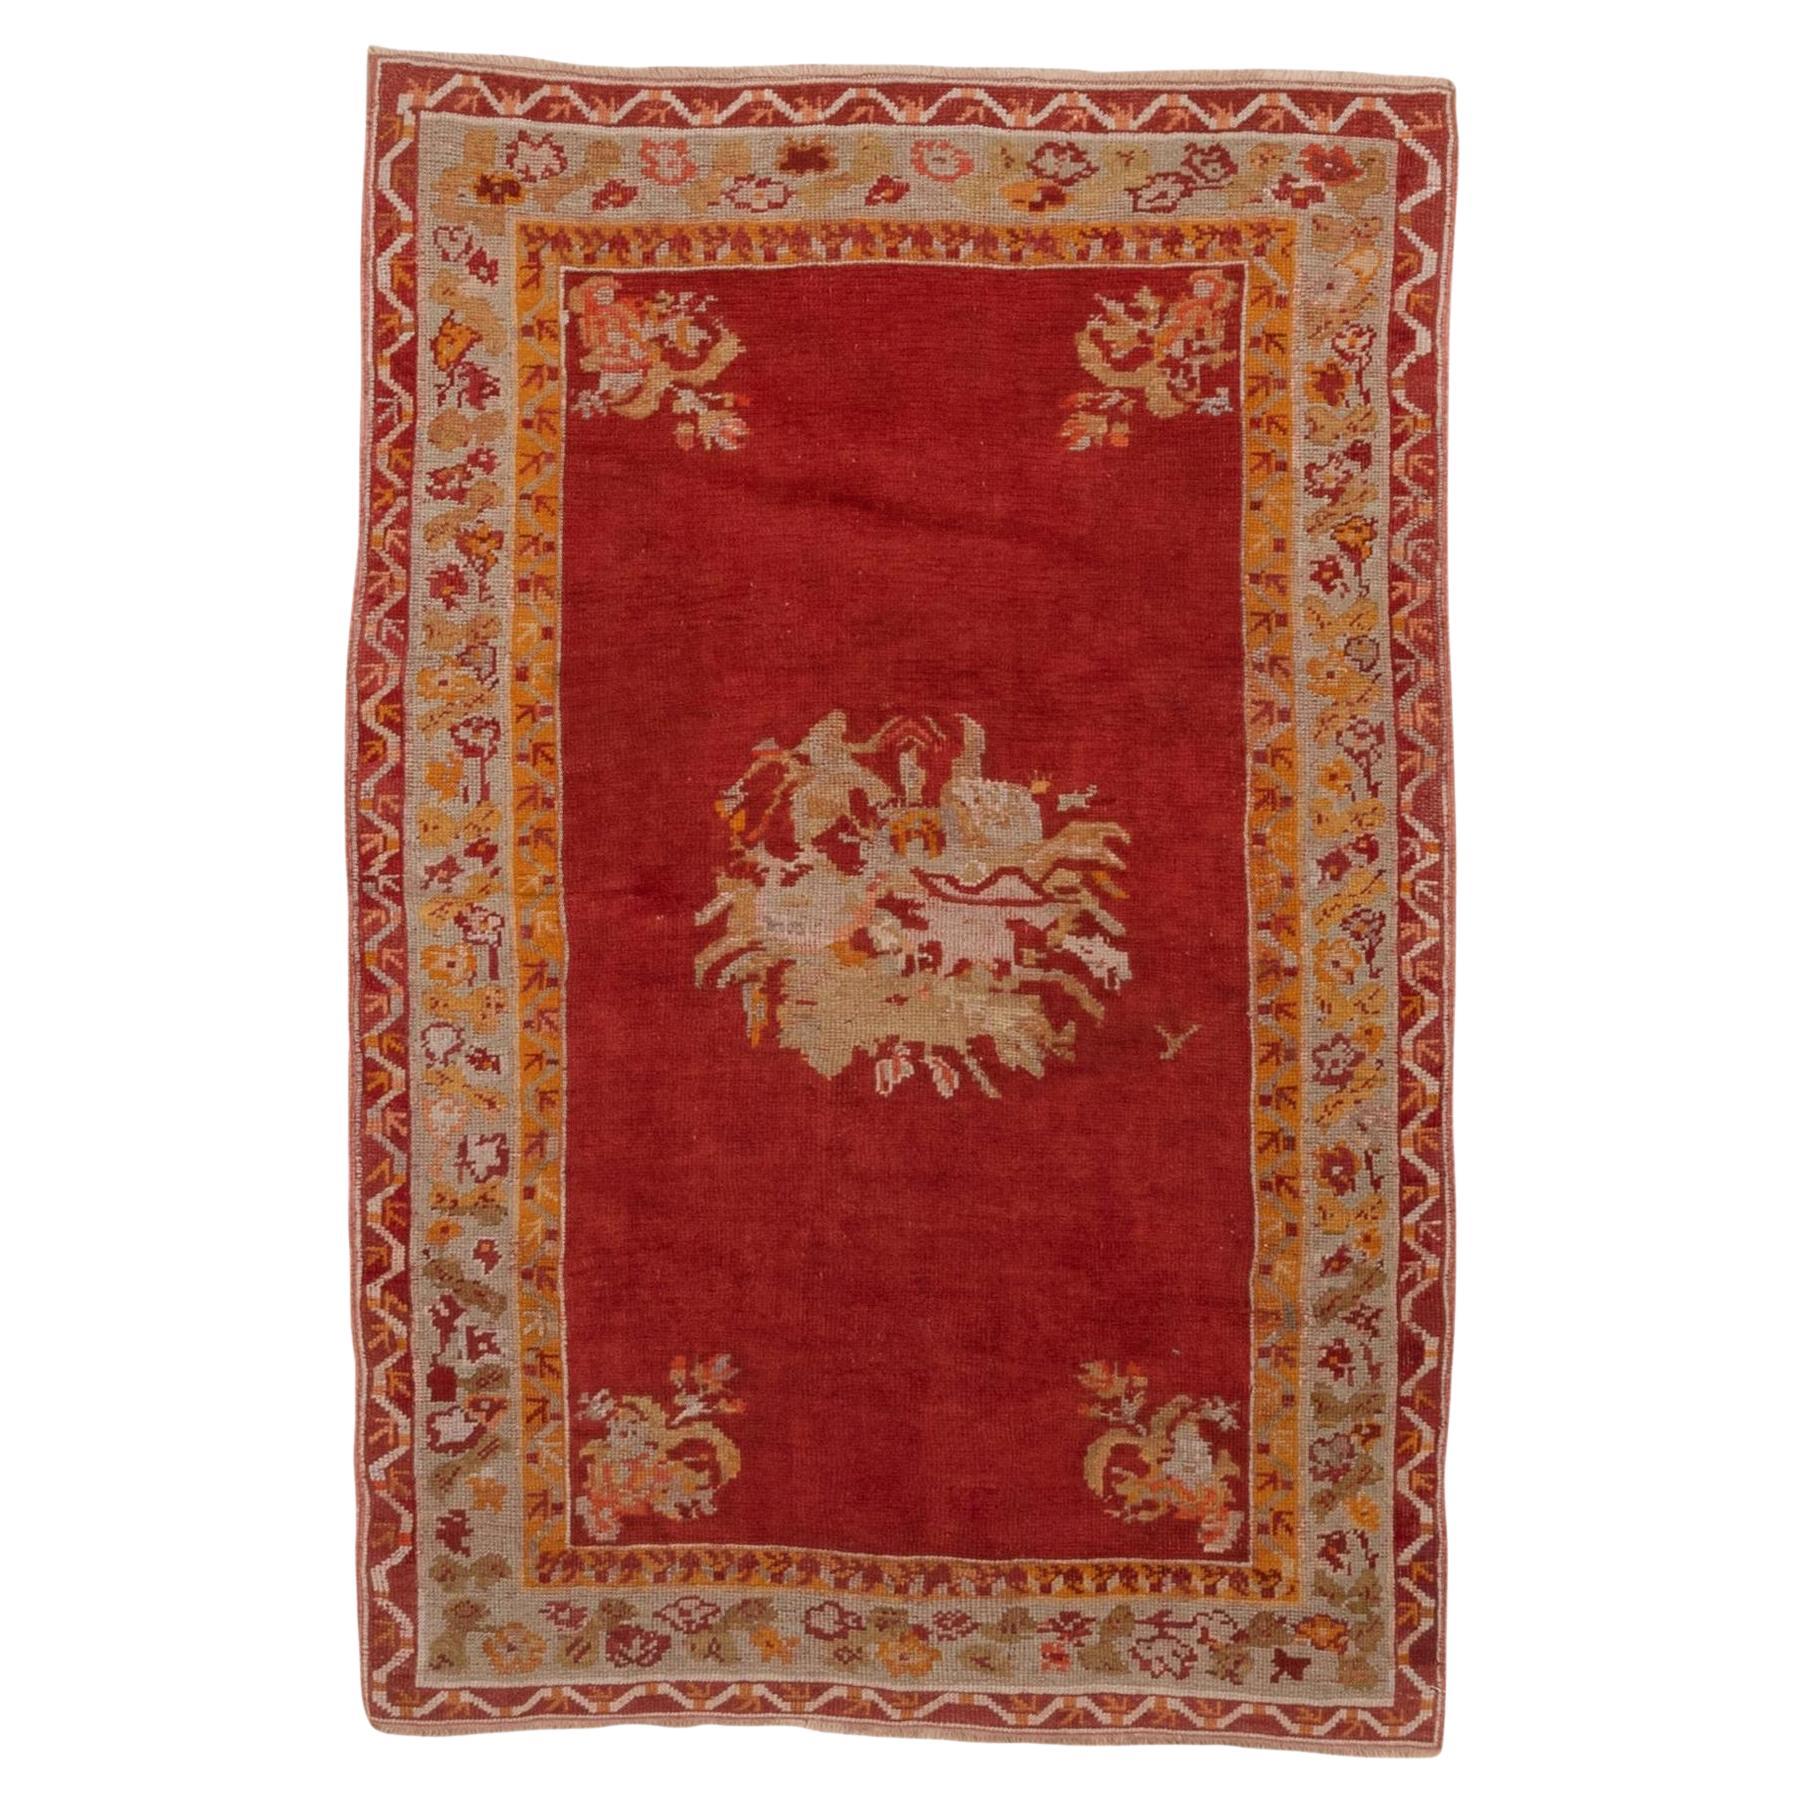 1930s Antique Turkish Oushak Rug, Red Field, Floral Multicolored Borders